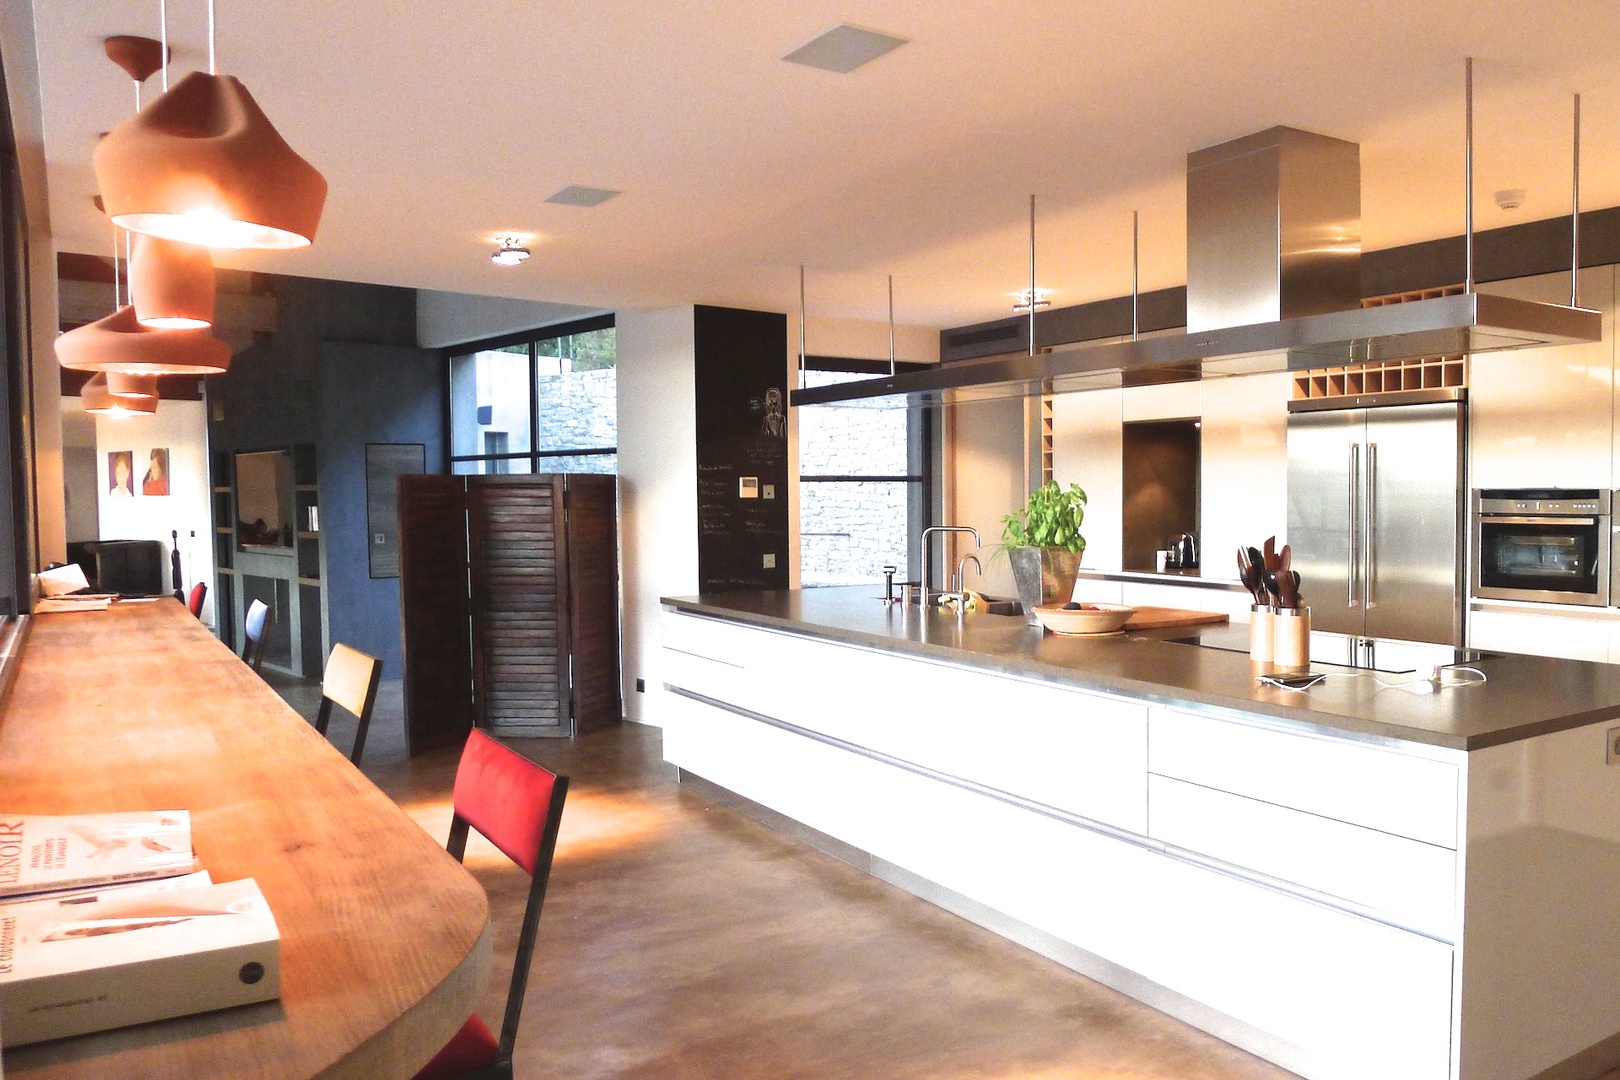 Open floor plan allows for socializing while preparing meals